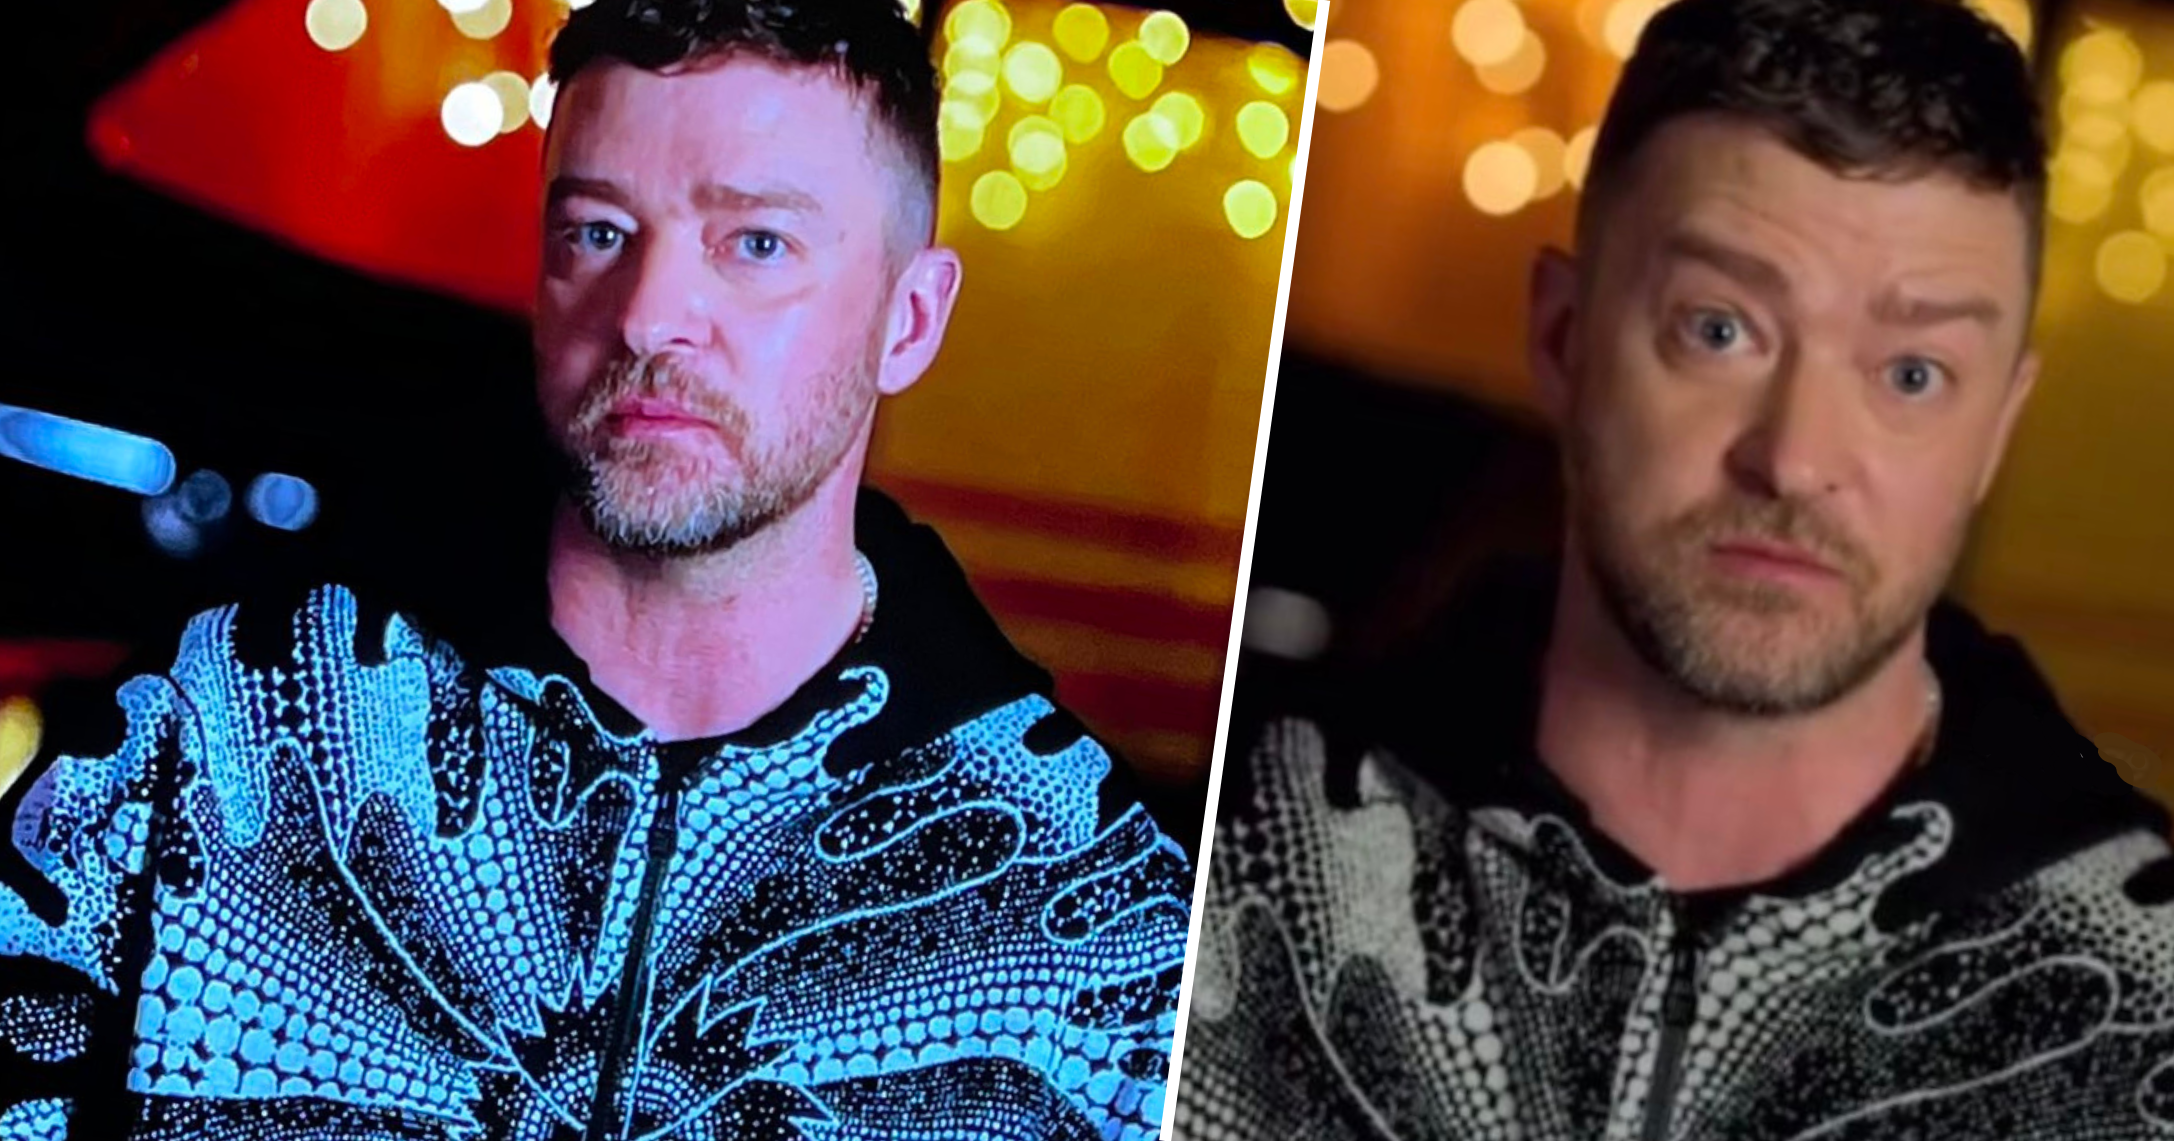 He's just aging like every other human: Fans defend Justin Timberlake  after iHeart appearance sparks criticism